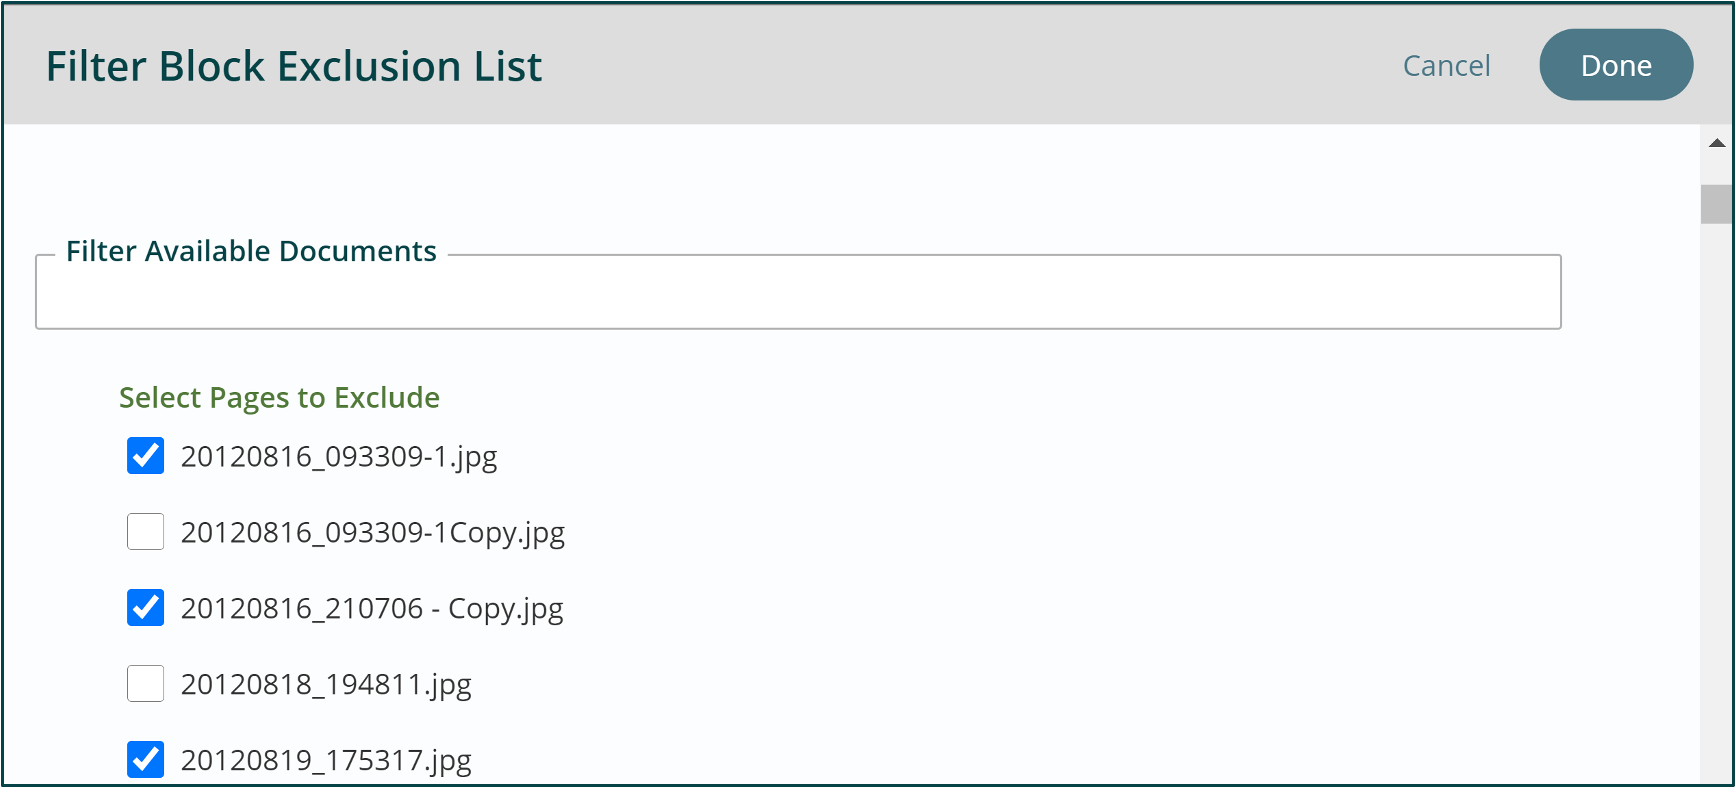 Filter Block Exclusion List check boxes